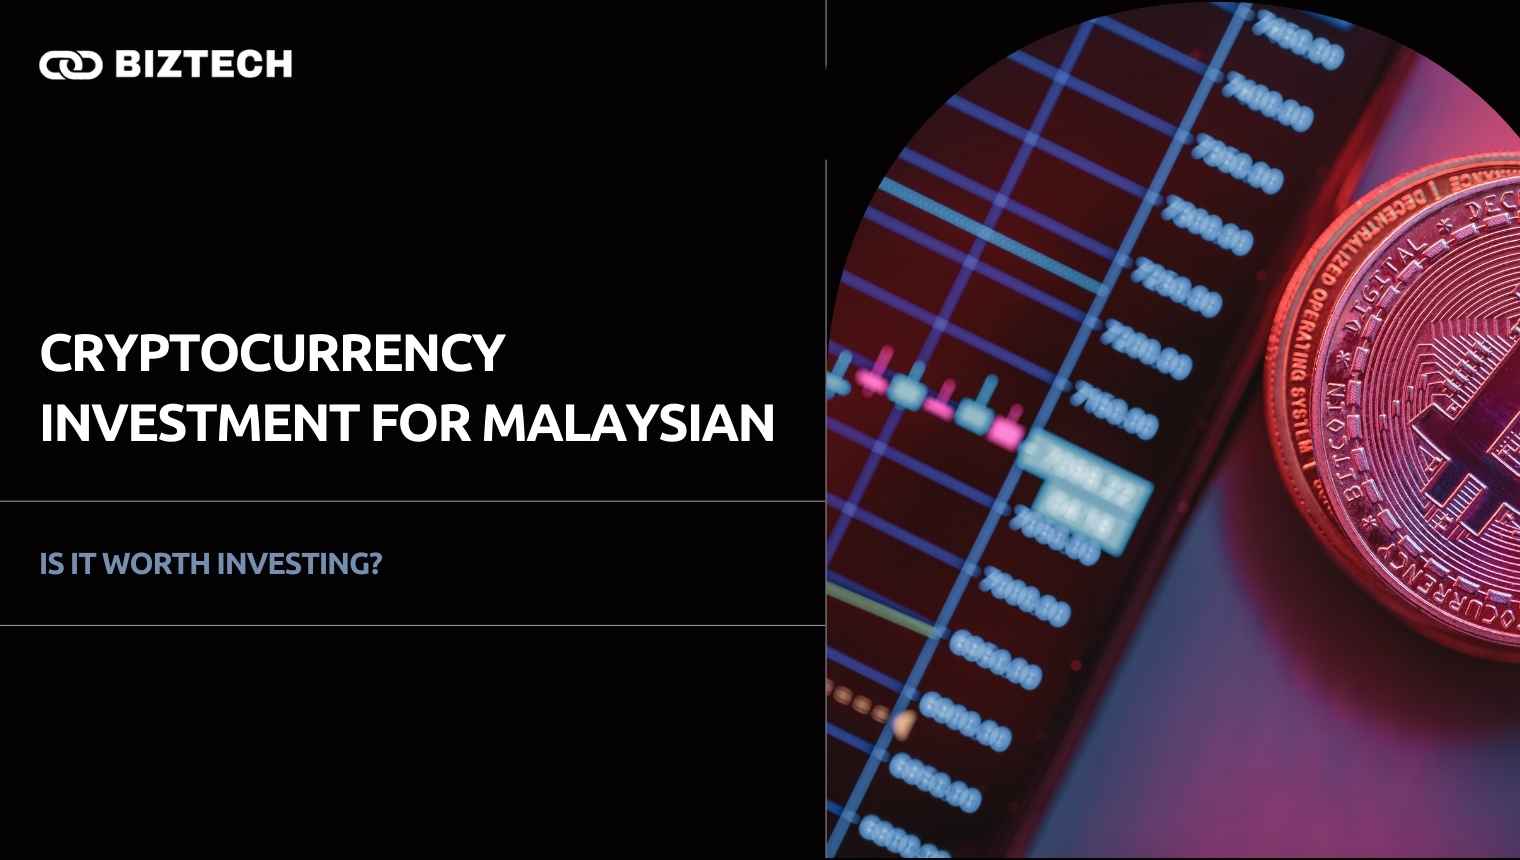 Cryptocurrency investment for Malaysian